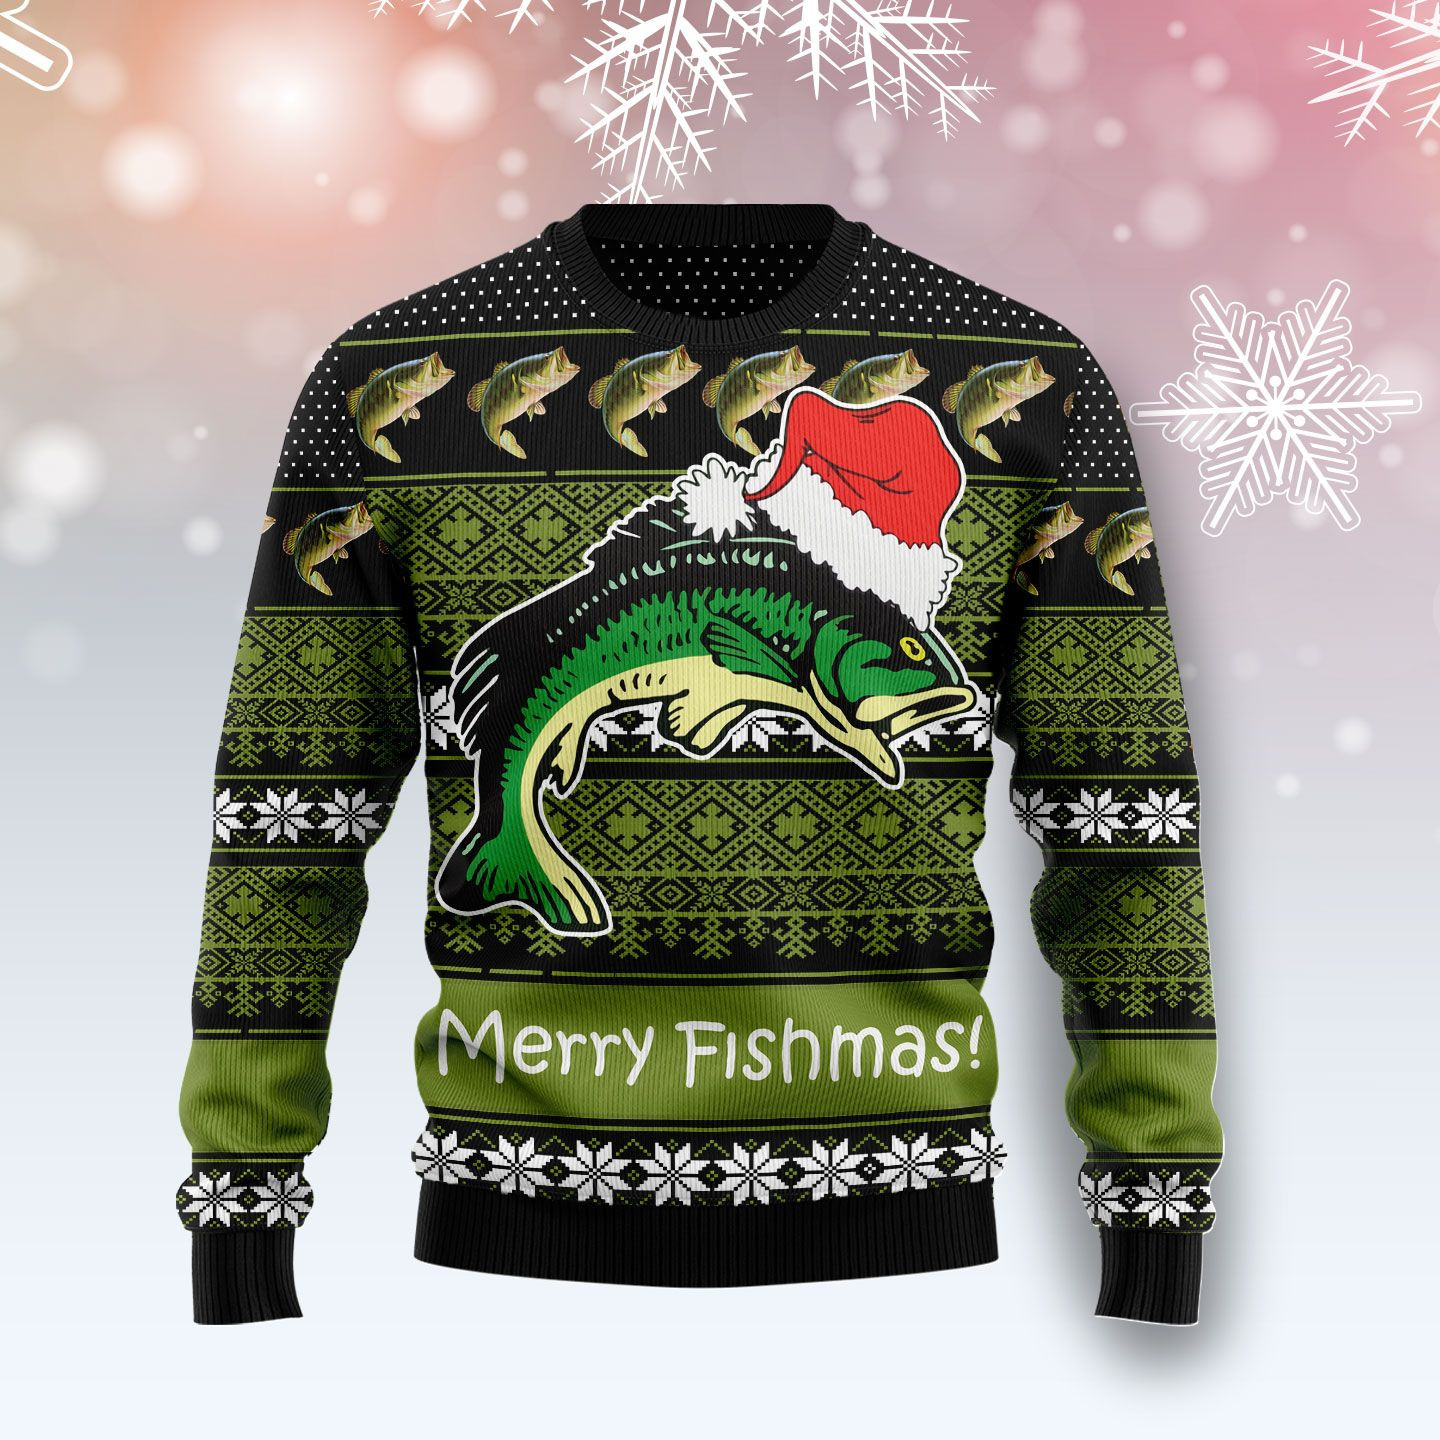 Fishing Merry Fishmas Ugly Christmas Sweater Ugly Sweater For Men Women